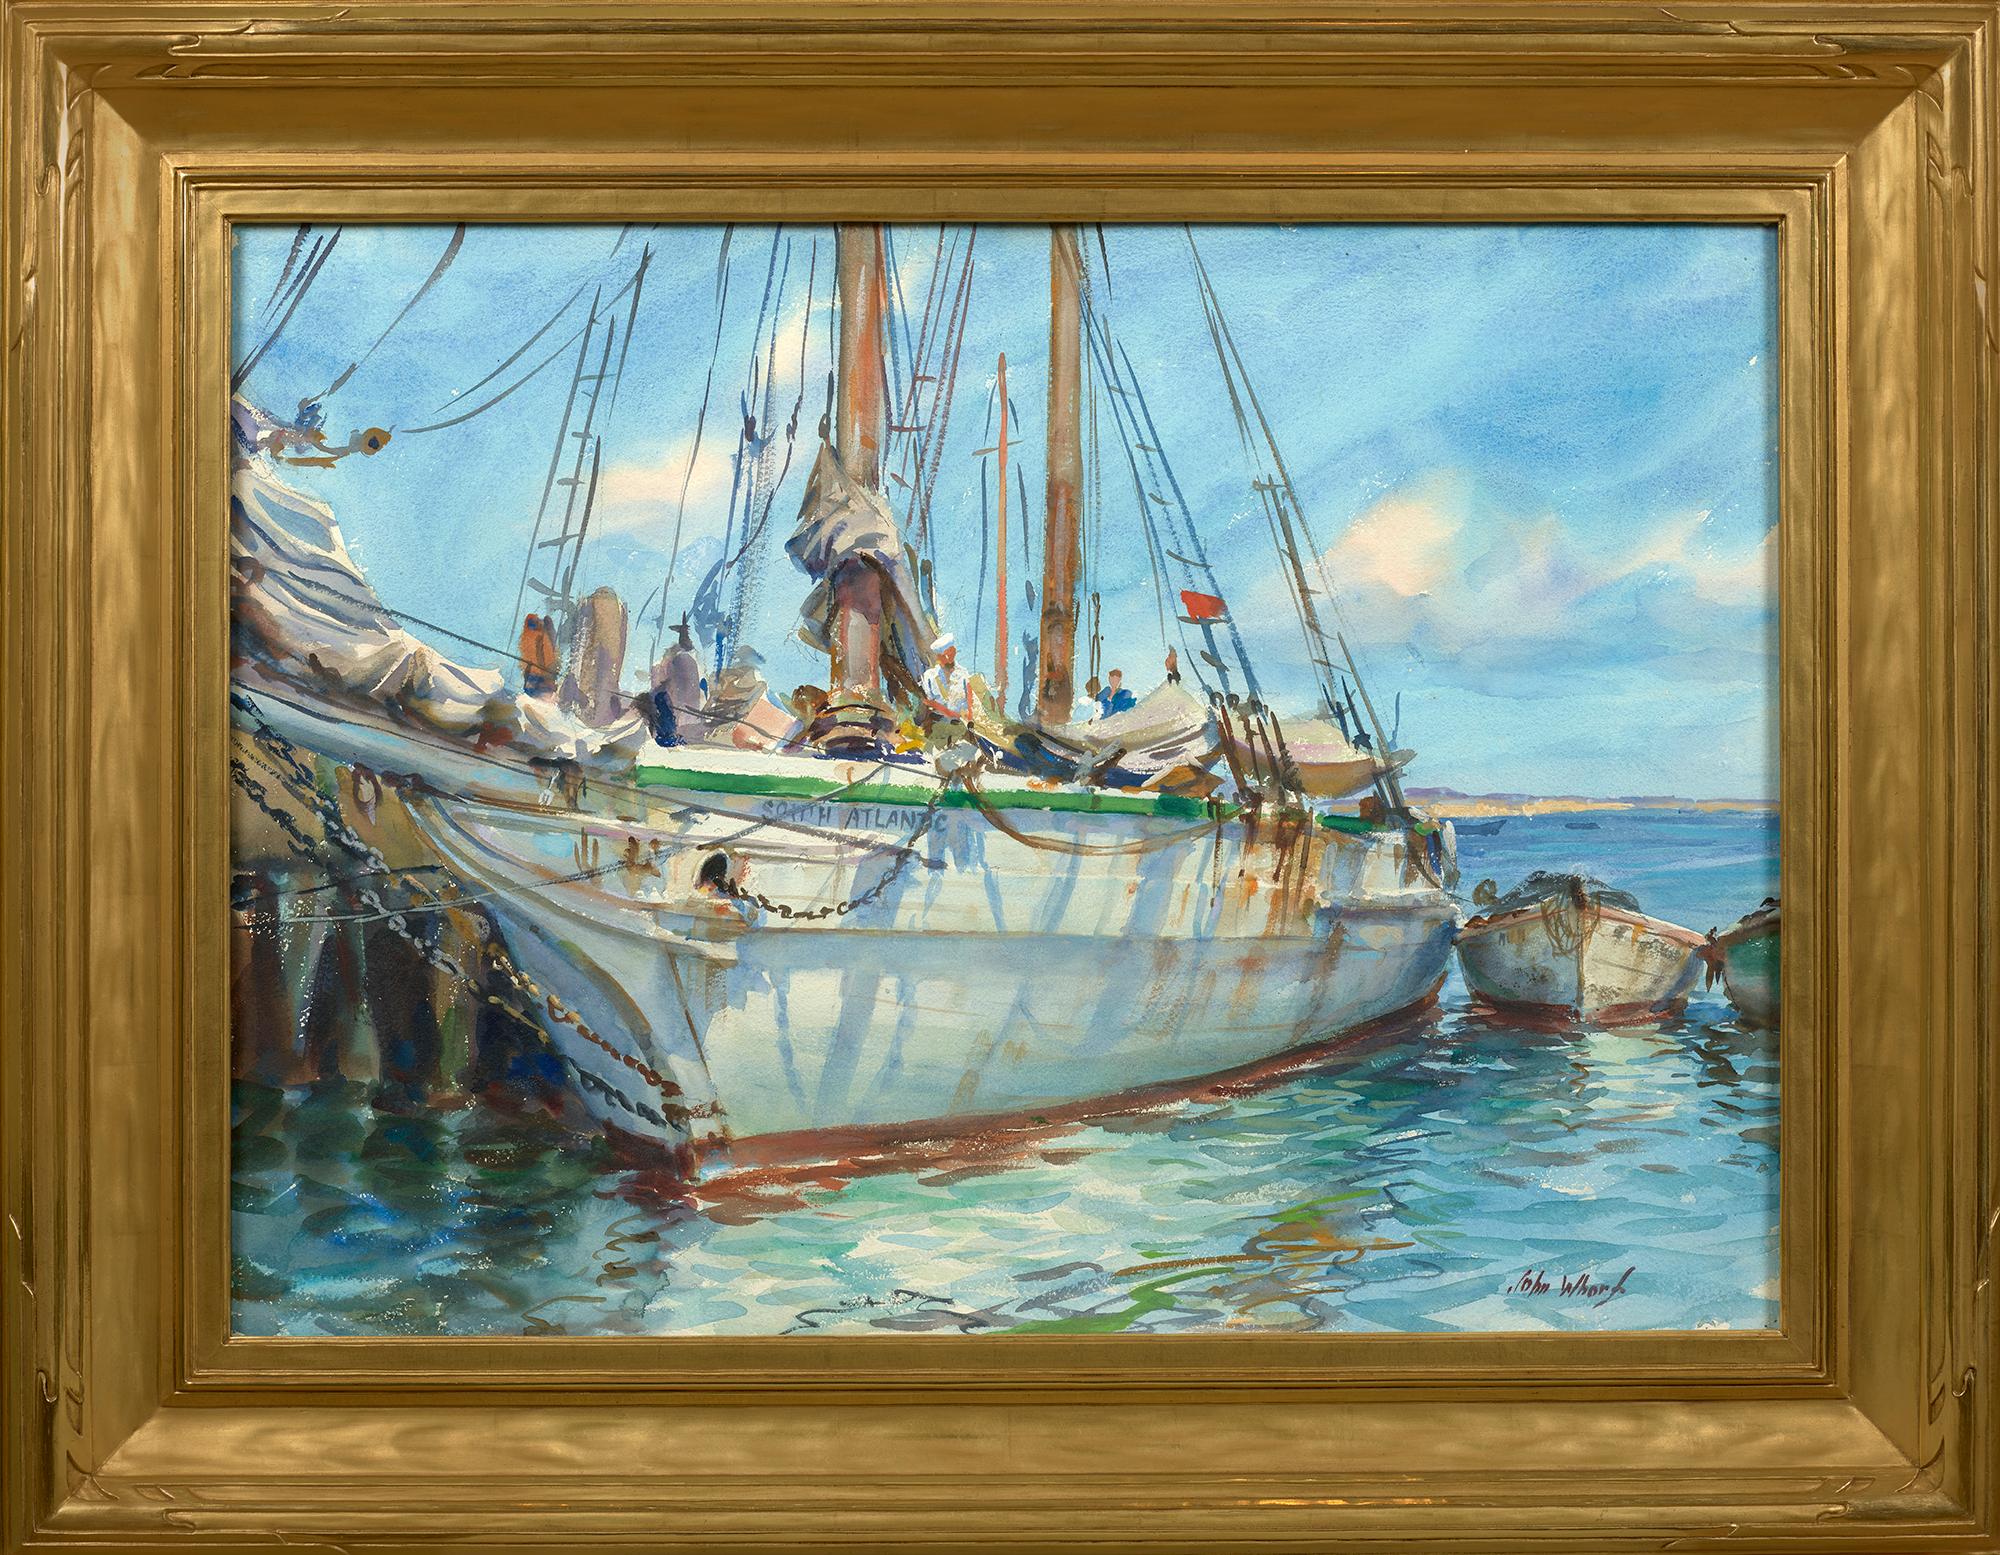 The “South Atlantic” in Port (on verso: Seascape Study) - Painting by John Whorf